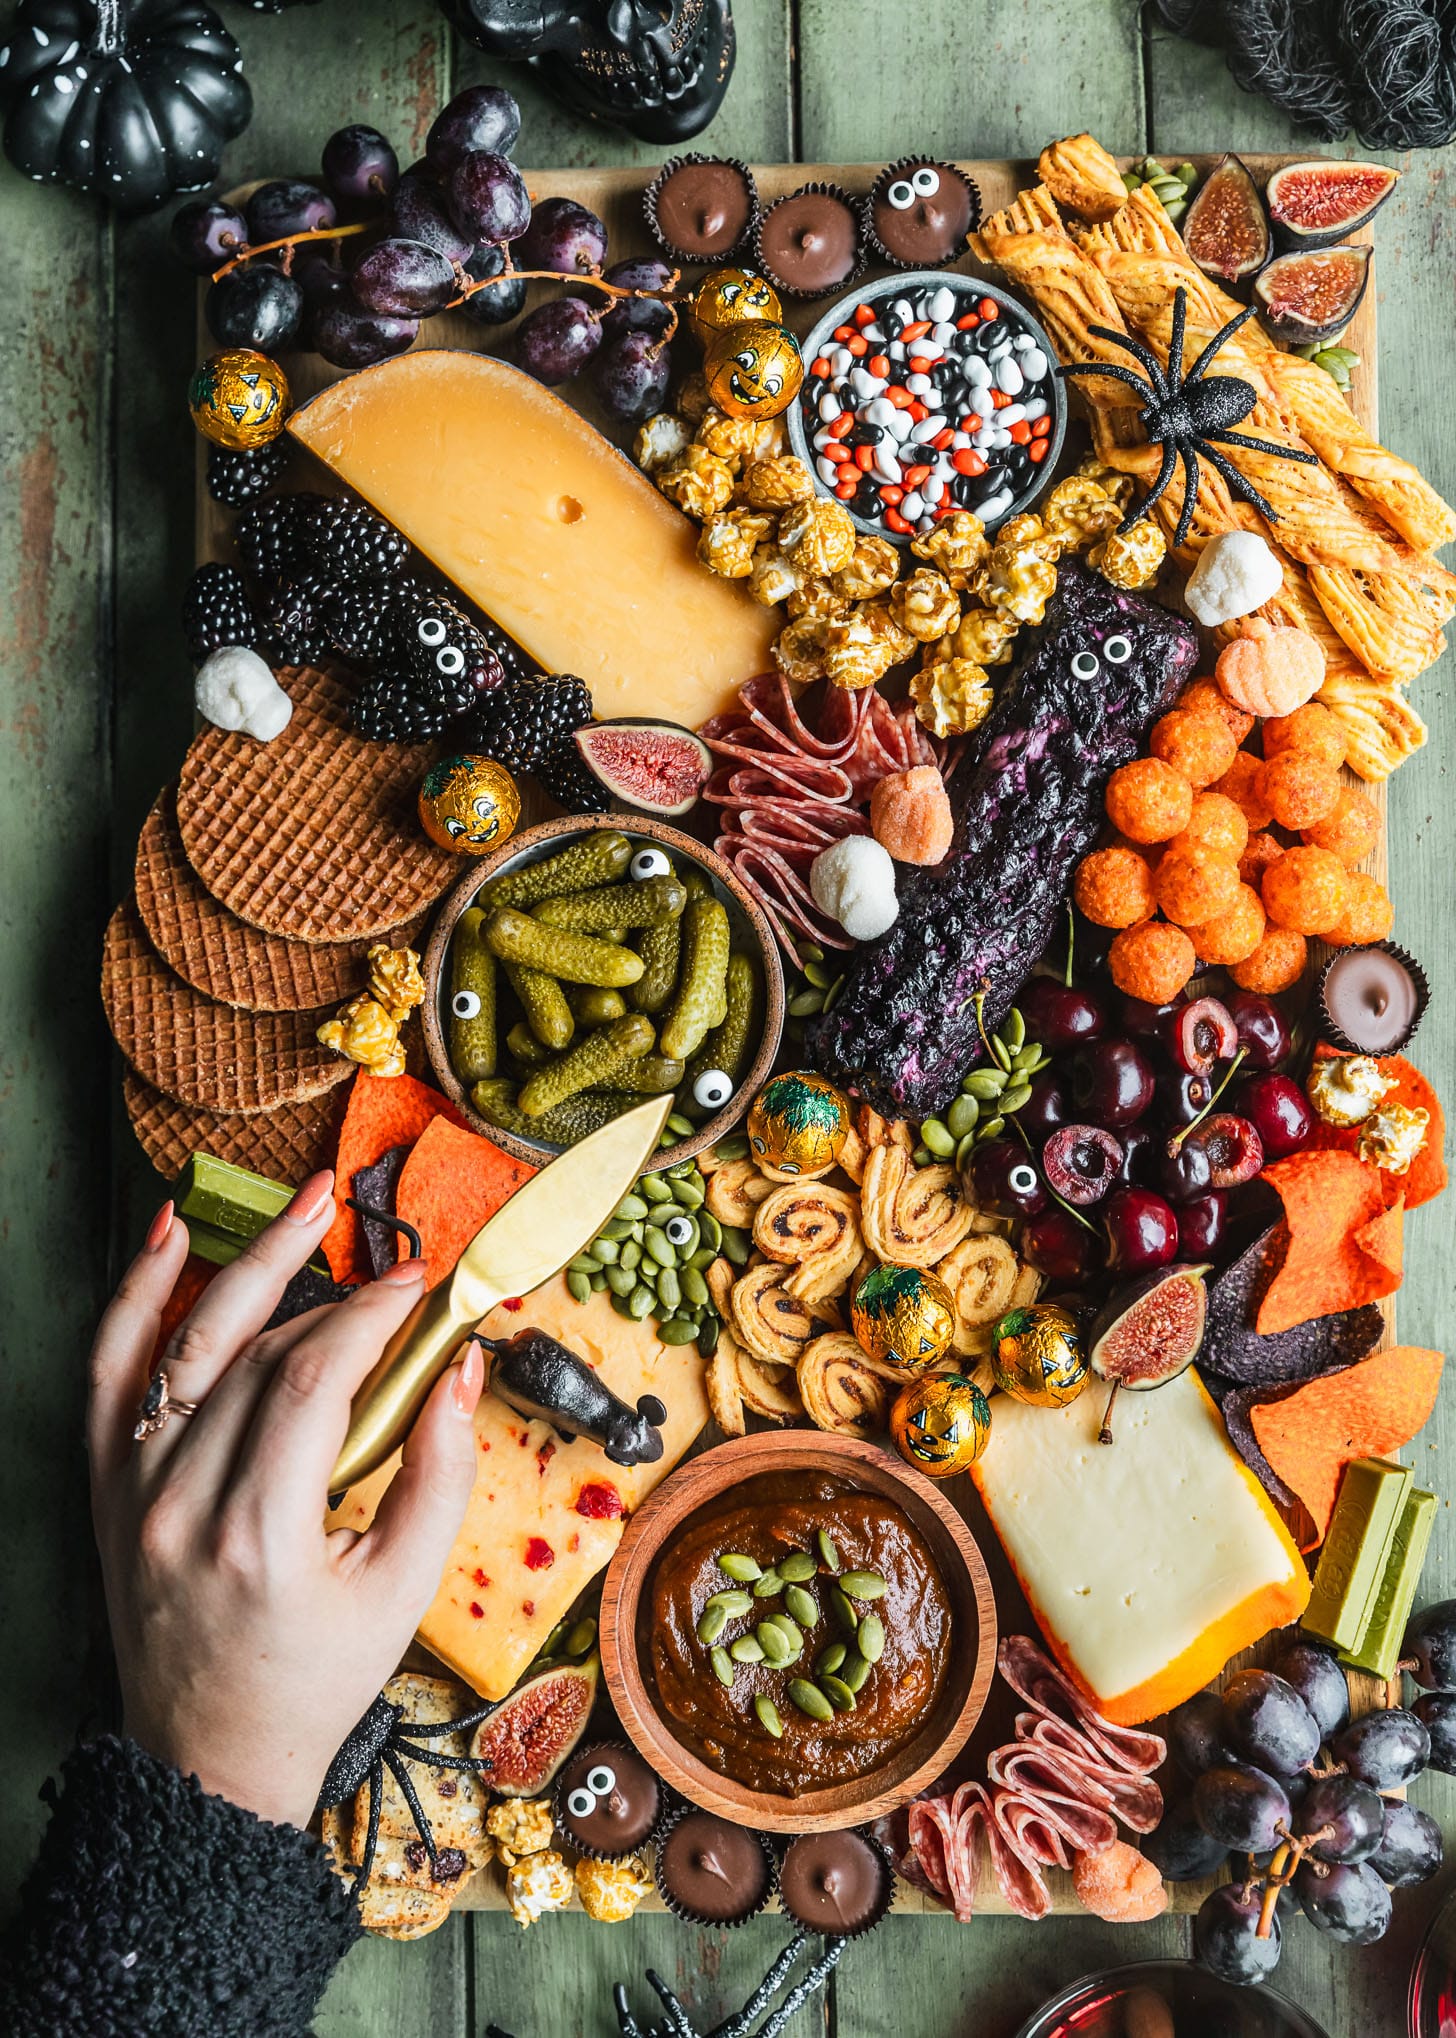 A woman's hand holding a gold cheese knife and reaching for cheese on a Halloween charcuterie board next to a black skeleton and glasses of red wine on a wood green board.